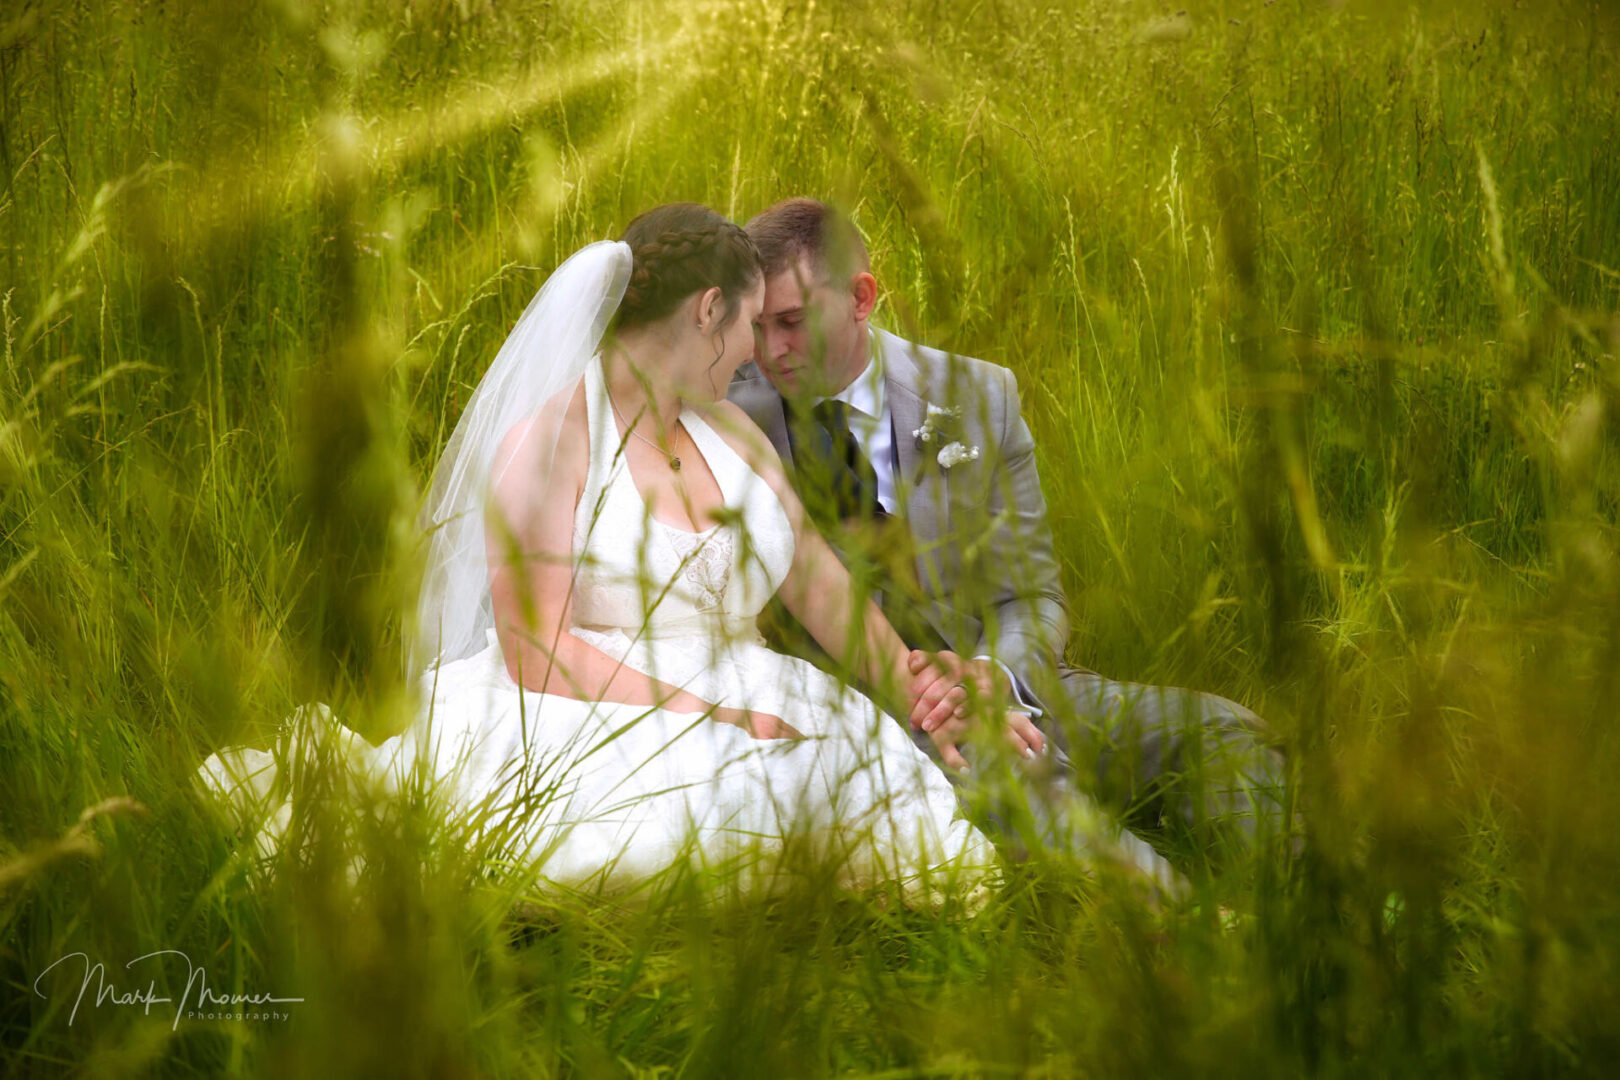 wedding videography and photography